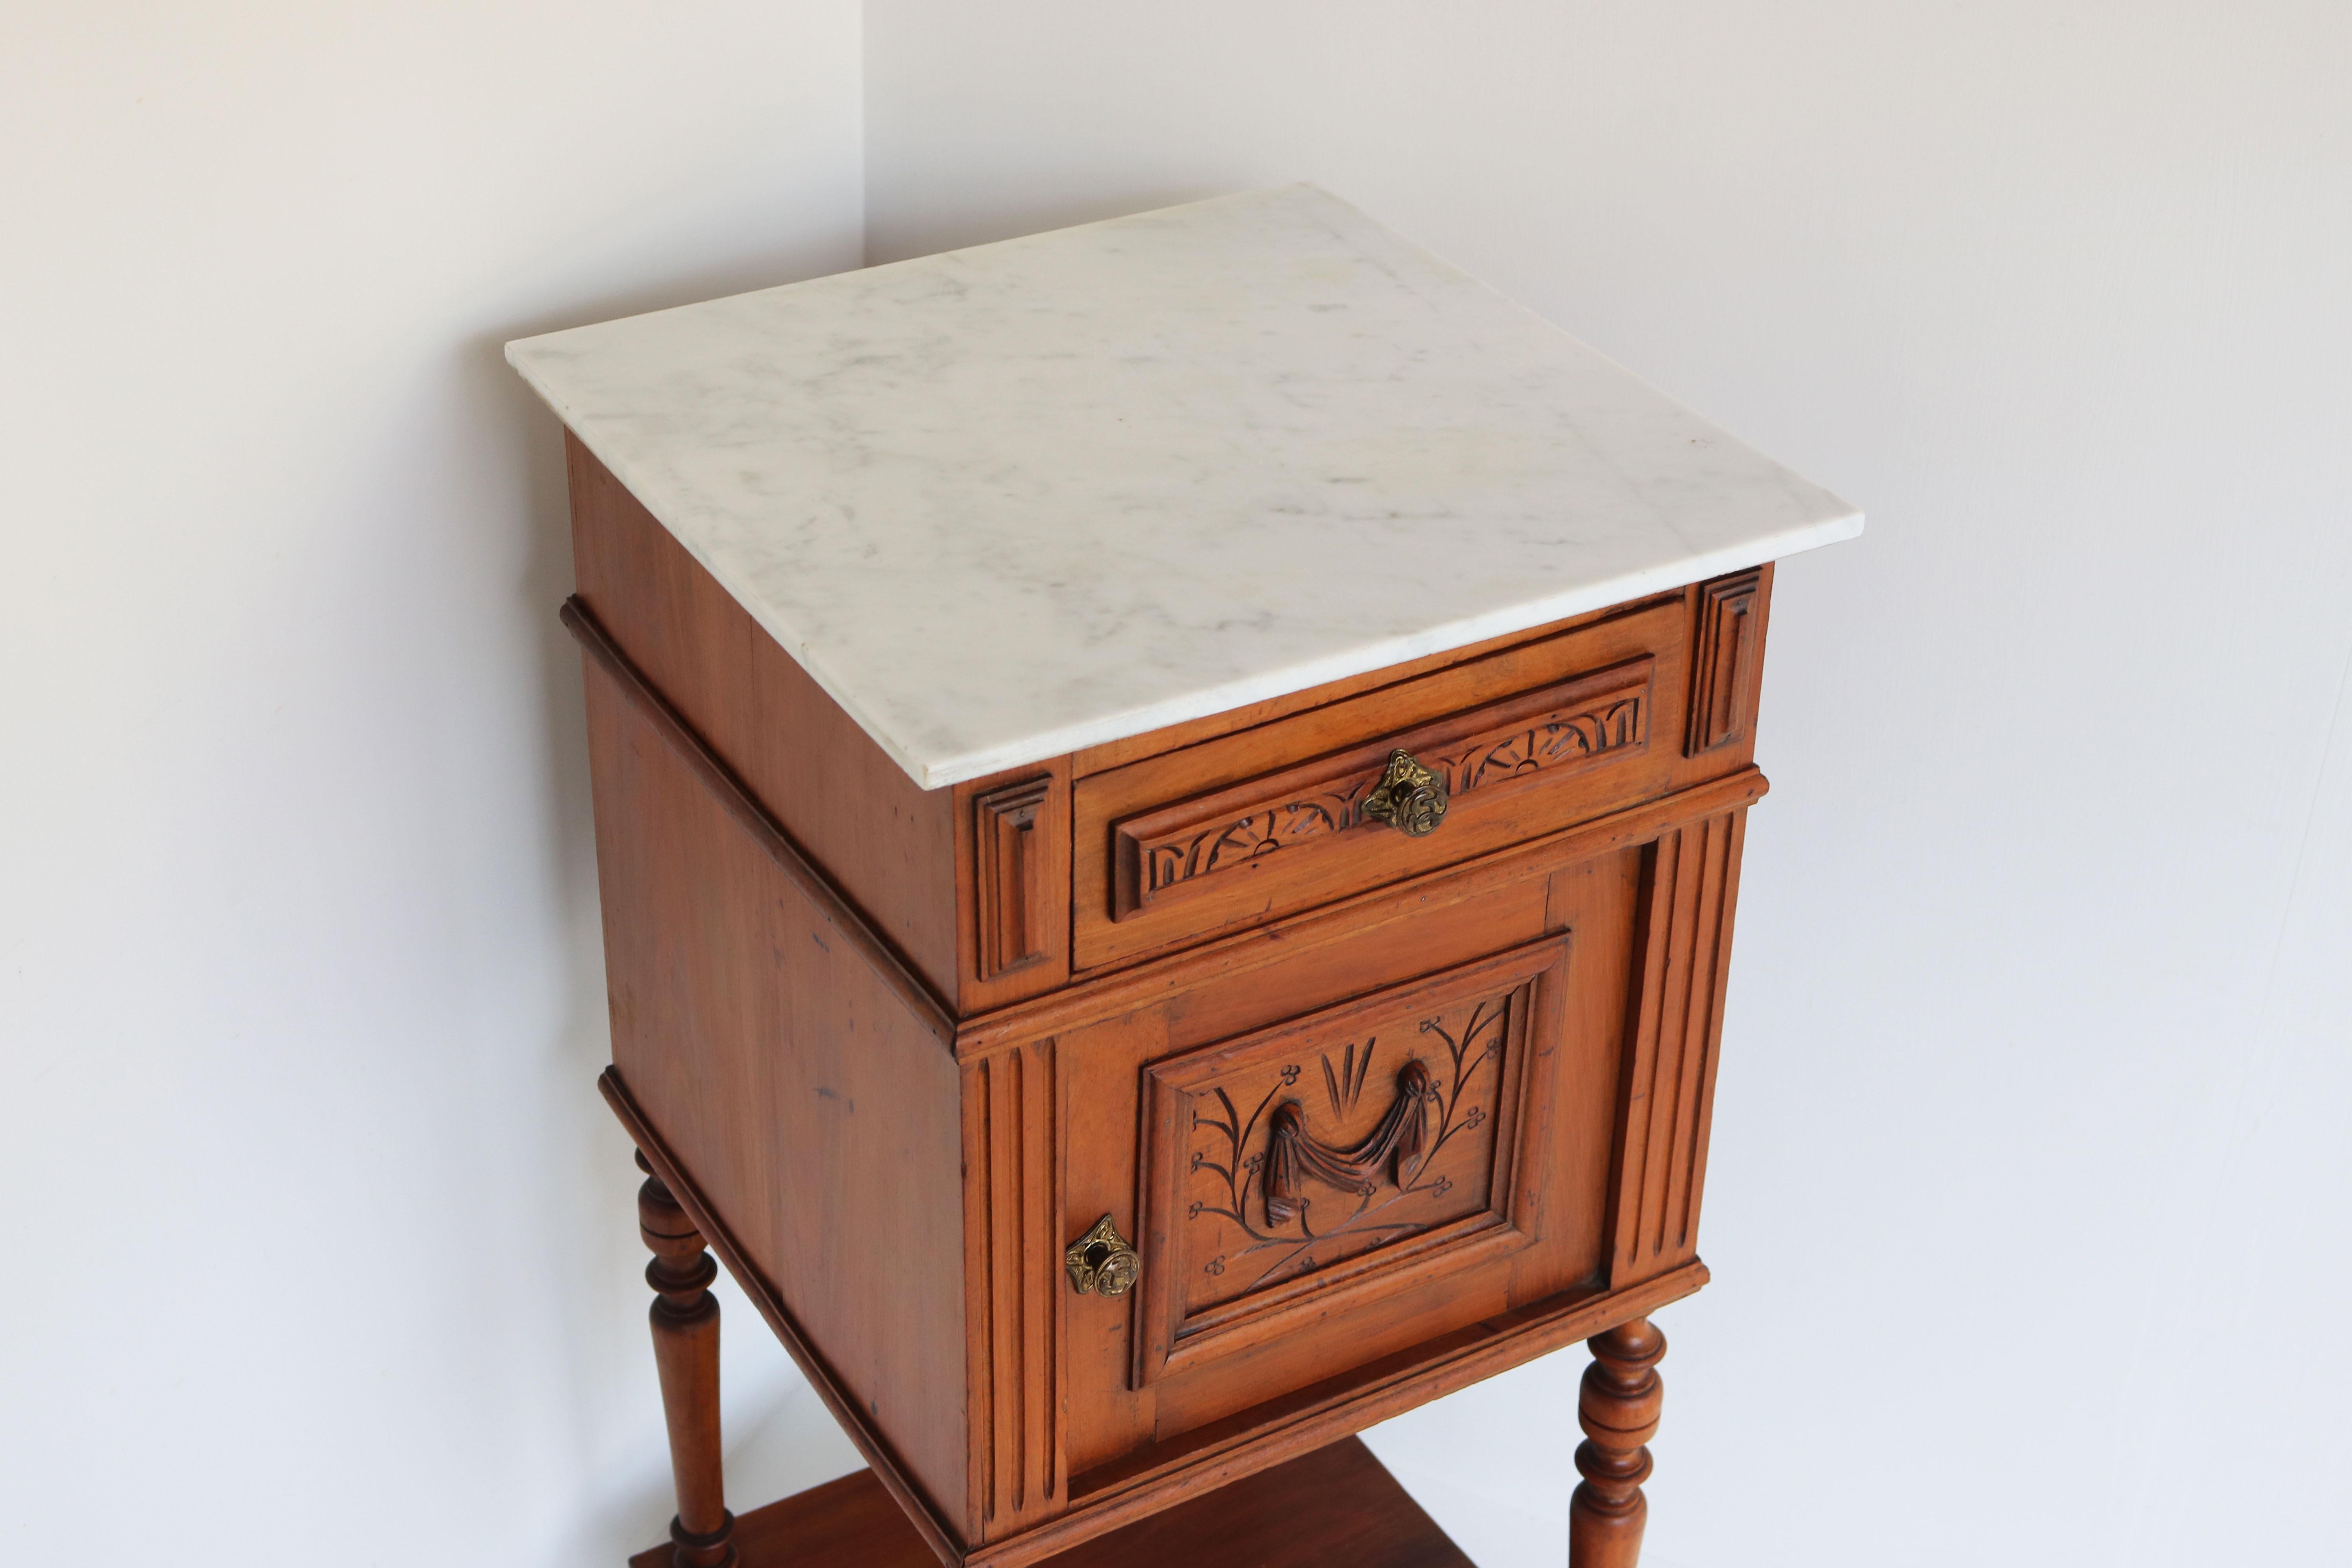 Gorgeous antique French 19th century night stand / bedside table 
The cabinet is made from Fruitwood with hand-carved decoration, really nice craftsmanship and attention to detail. 
The cabinet has a Italian Carrara marble top which combines